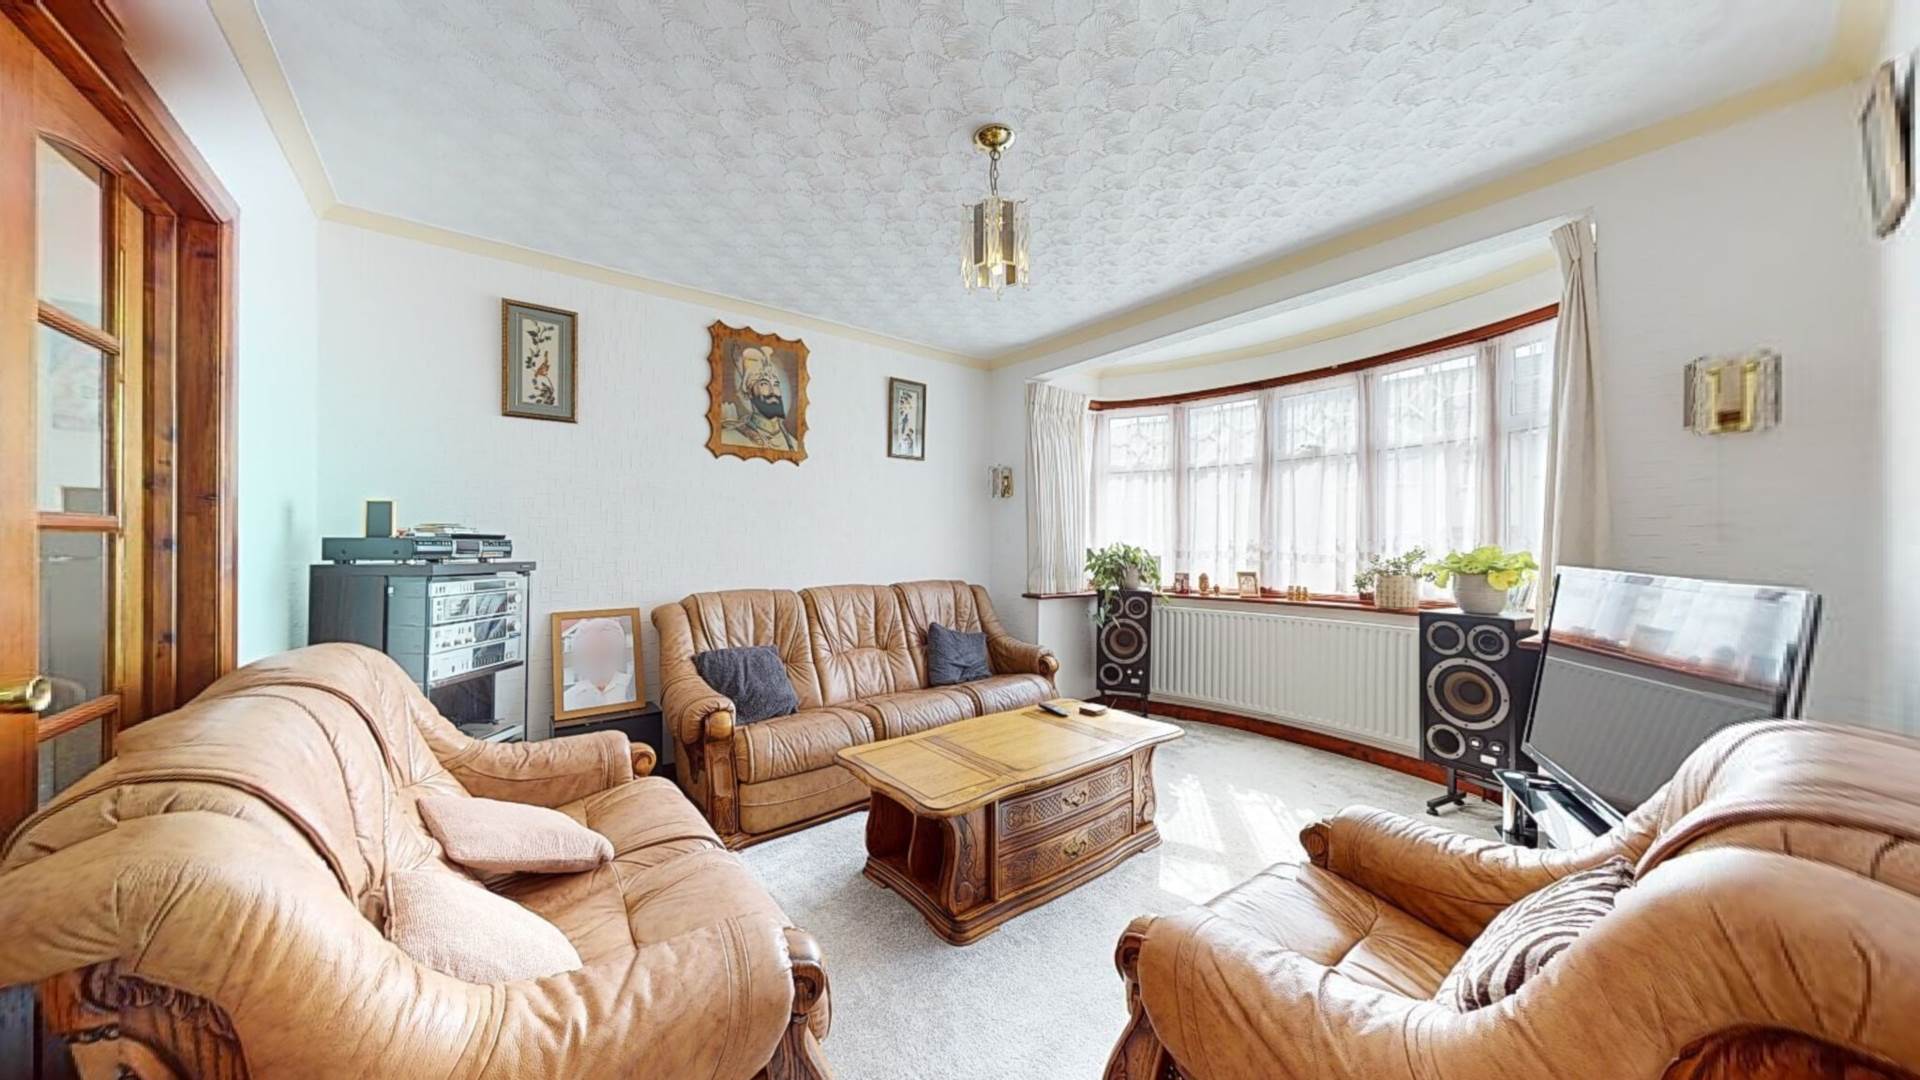 6 bed Semi-Detached House for rent in Hounslow. From iProperties Ltd